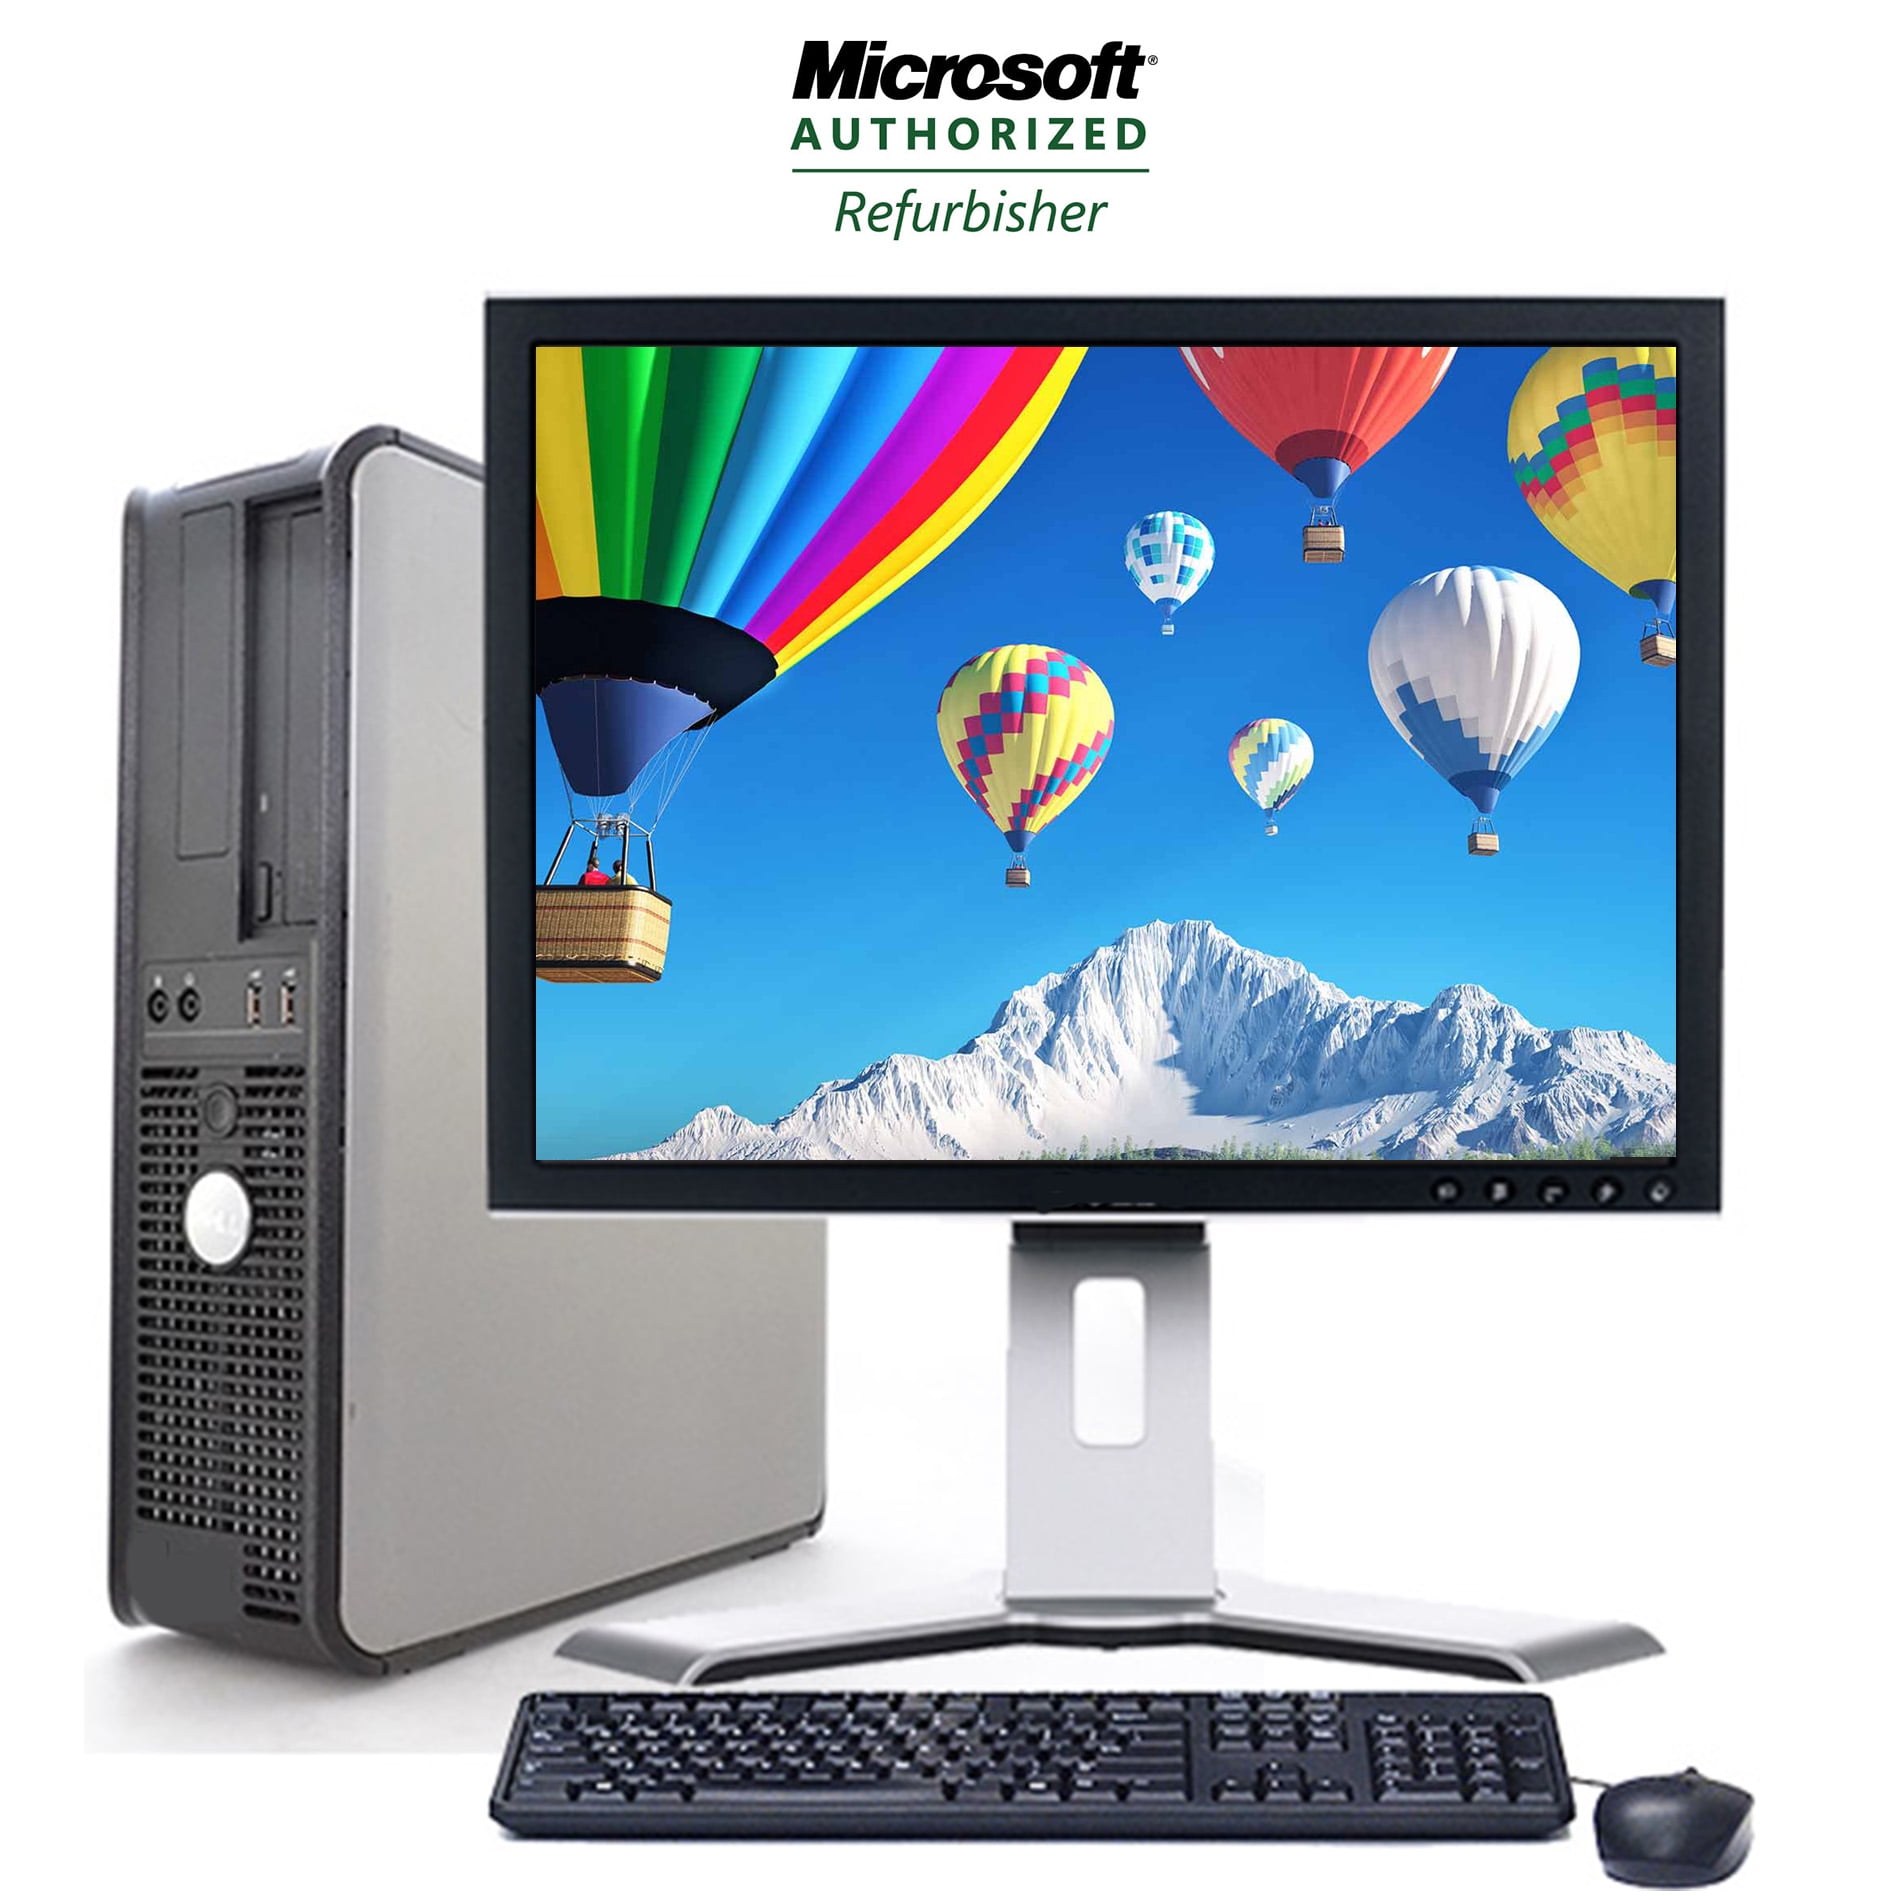 Dell Desktop Computer Tower Windows 10 Intel Core 2 Duo Processor 4gb Ram 160gb Hard Drive Dvd Wifi Webcam With A 17 Lcd Refurbished Pc Walmart Com Walmart Com - how to update roblox on a dell computer